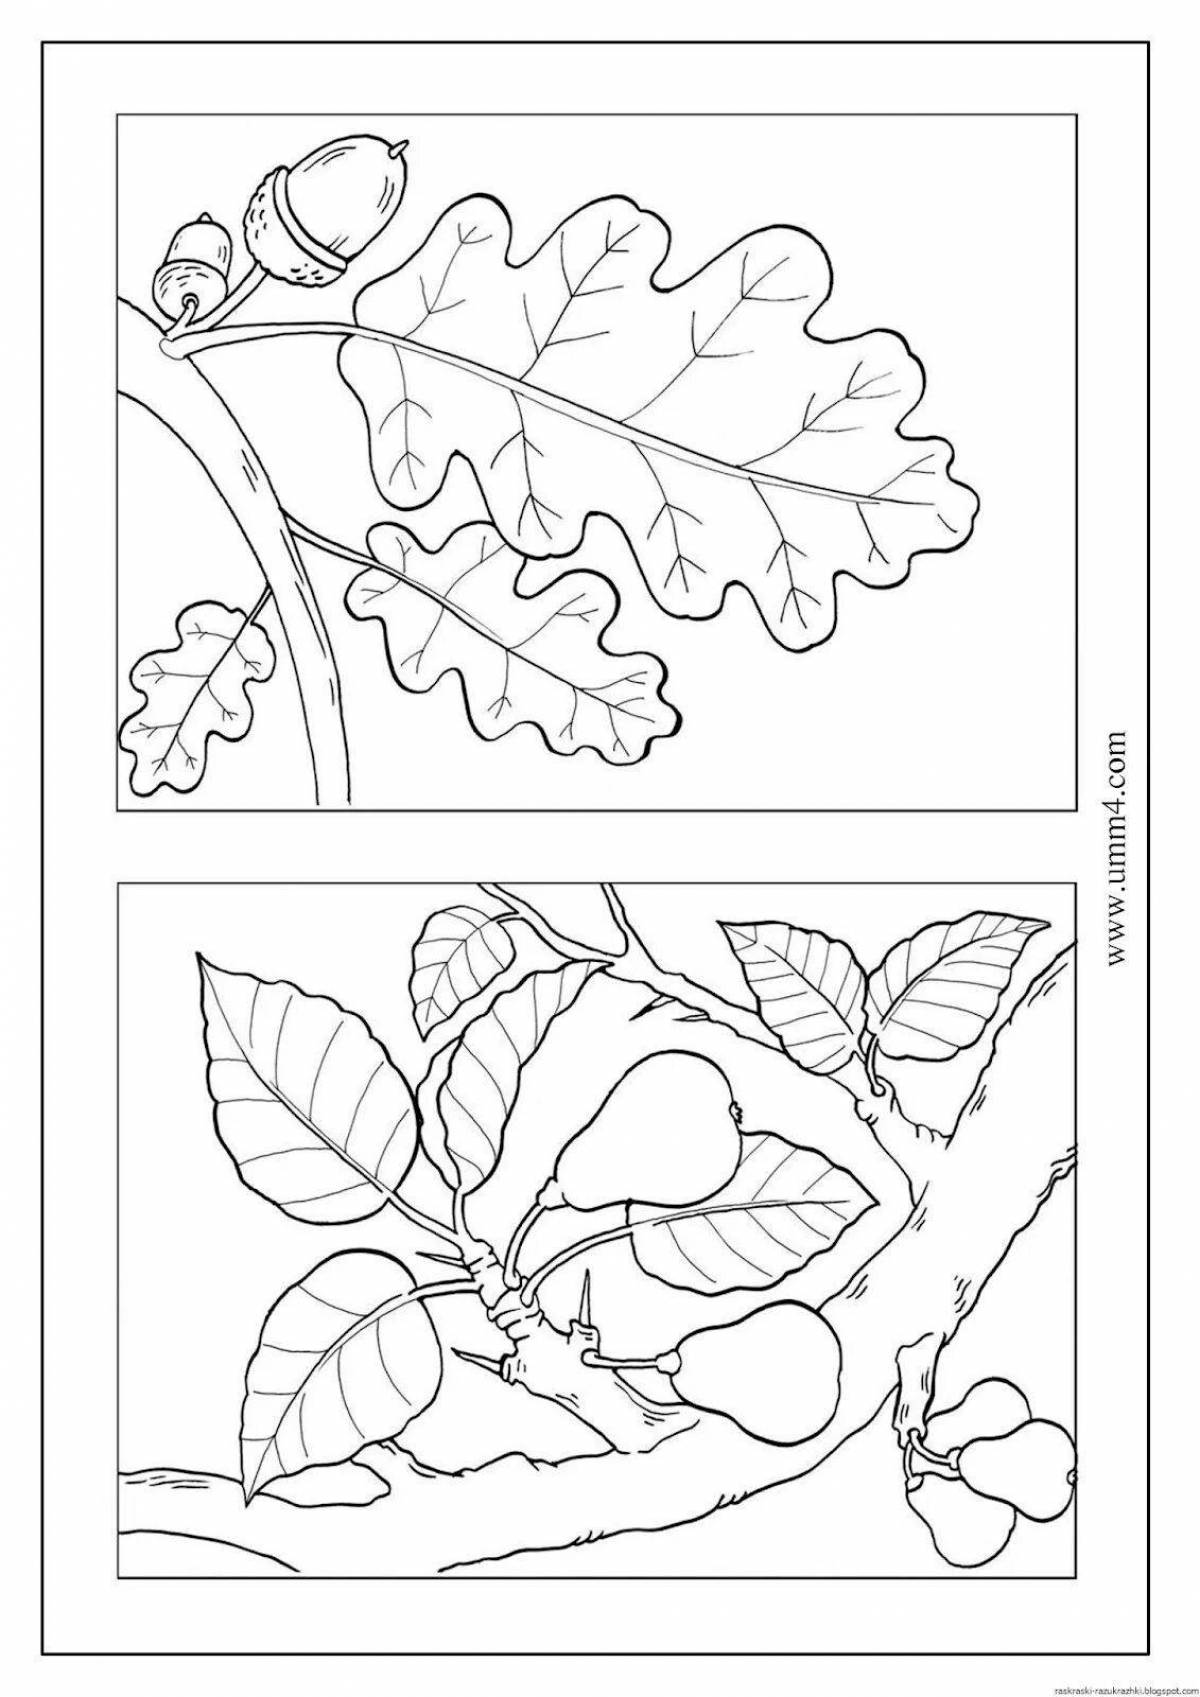 Bright coloring page 4